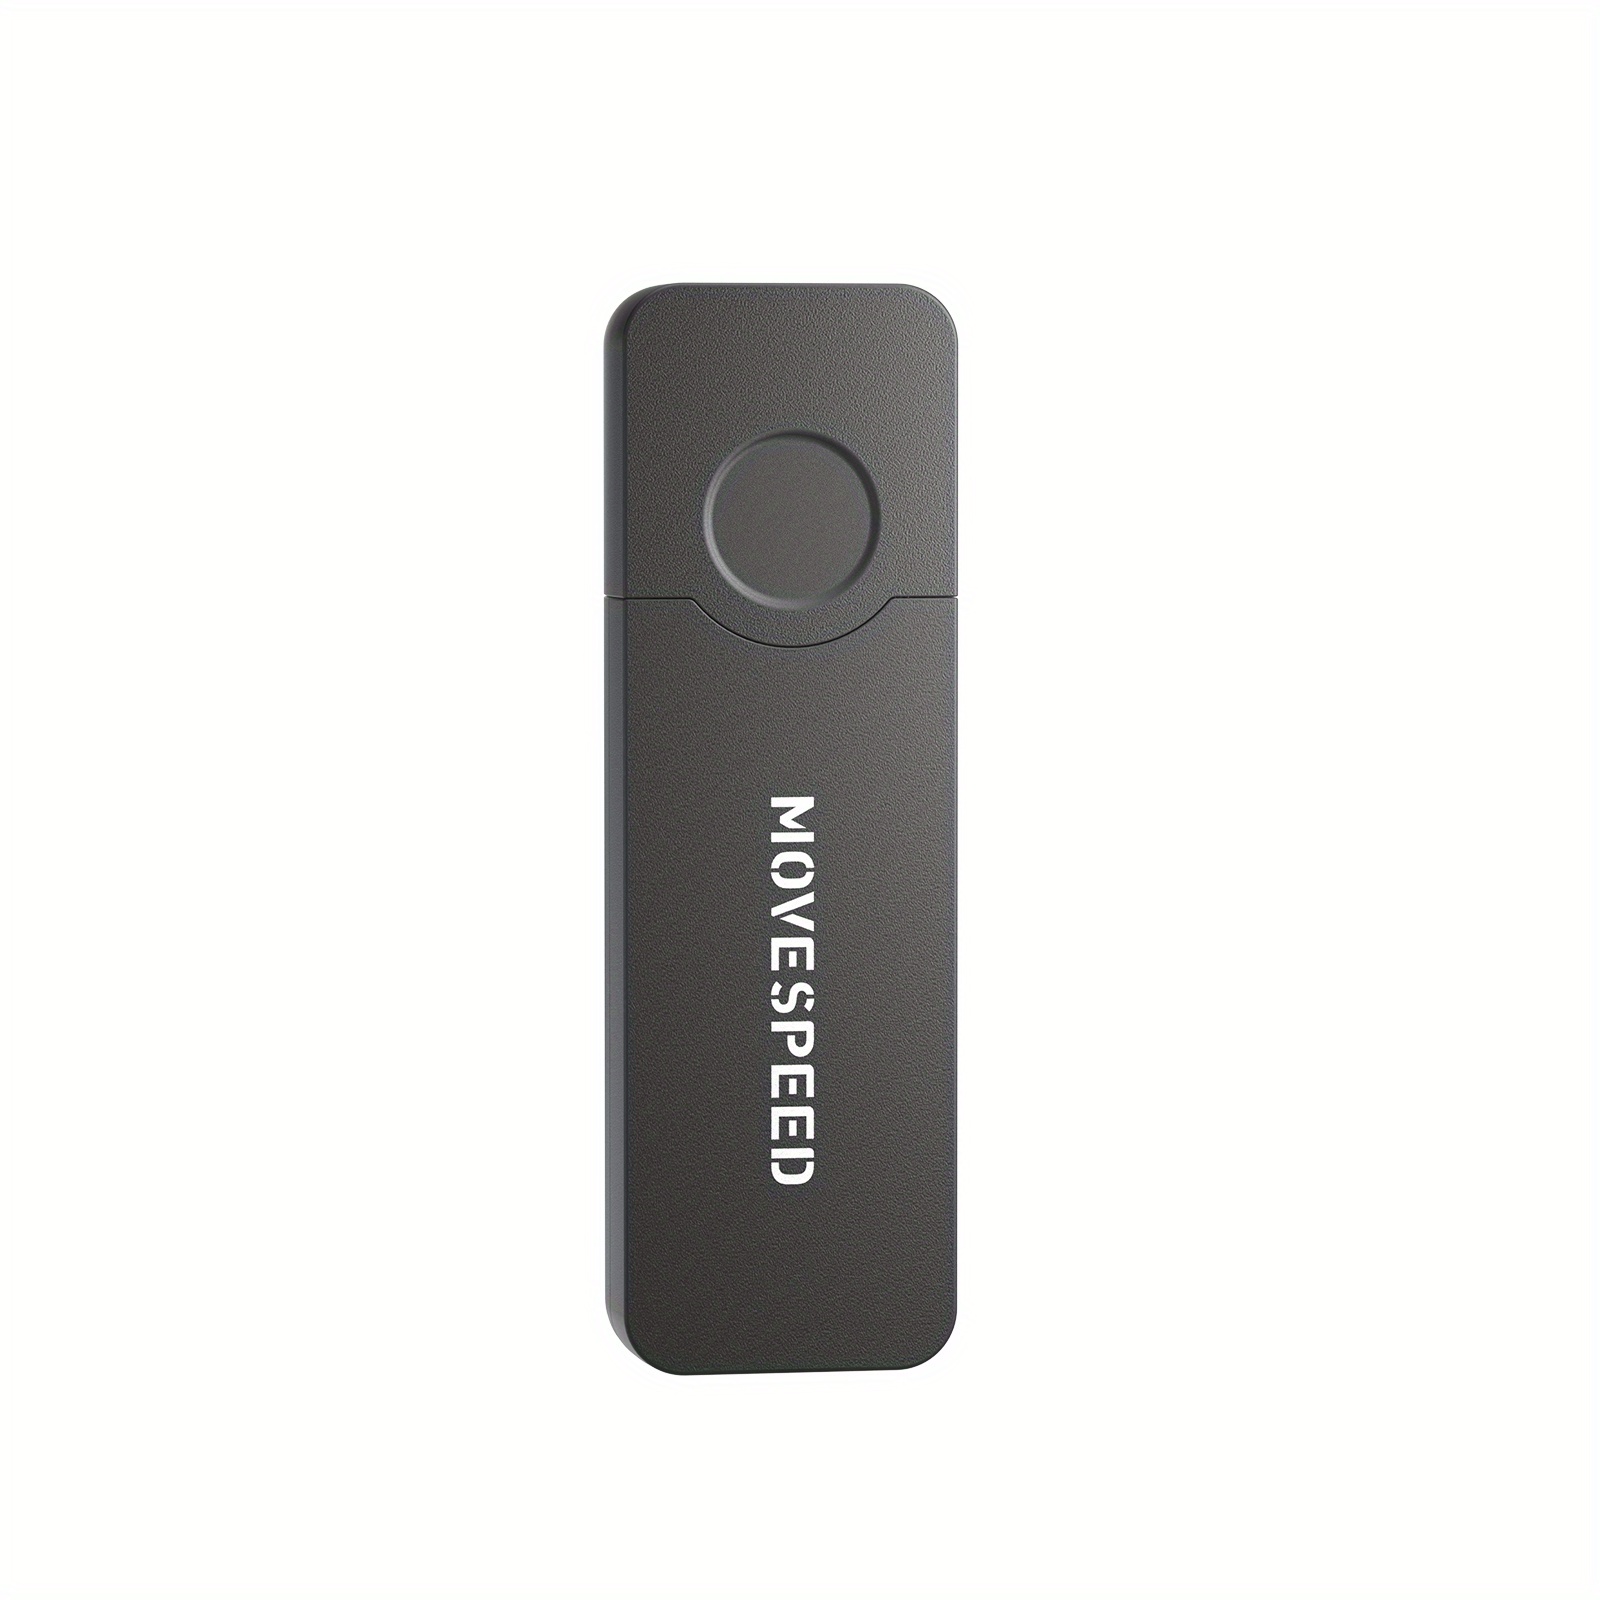 MOVESPEED Portable USB Flash Drive High Speed Pen Drive 64GB 32GB 16GB 8GB  Pendrive Flash Disk